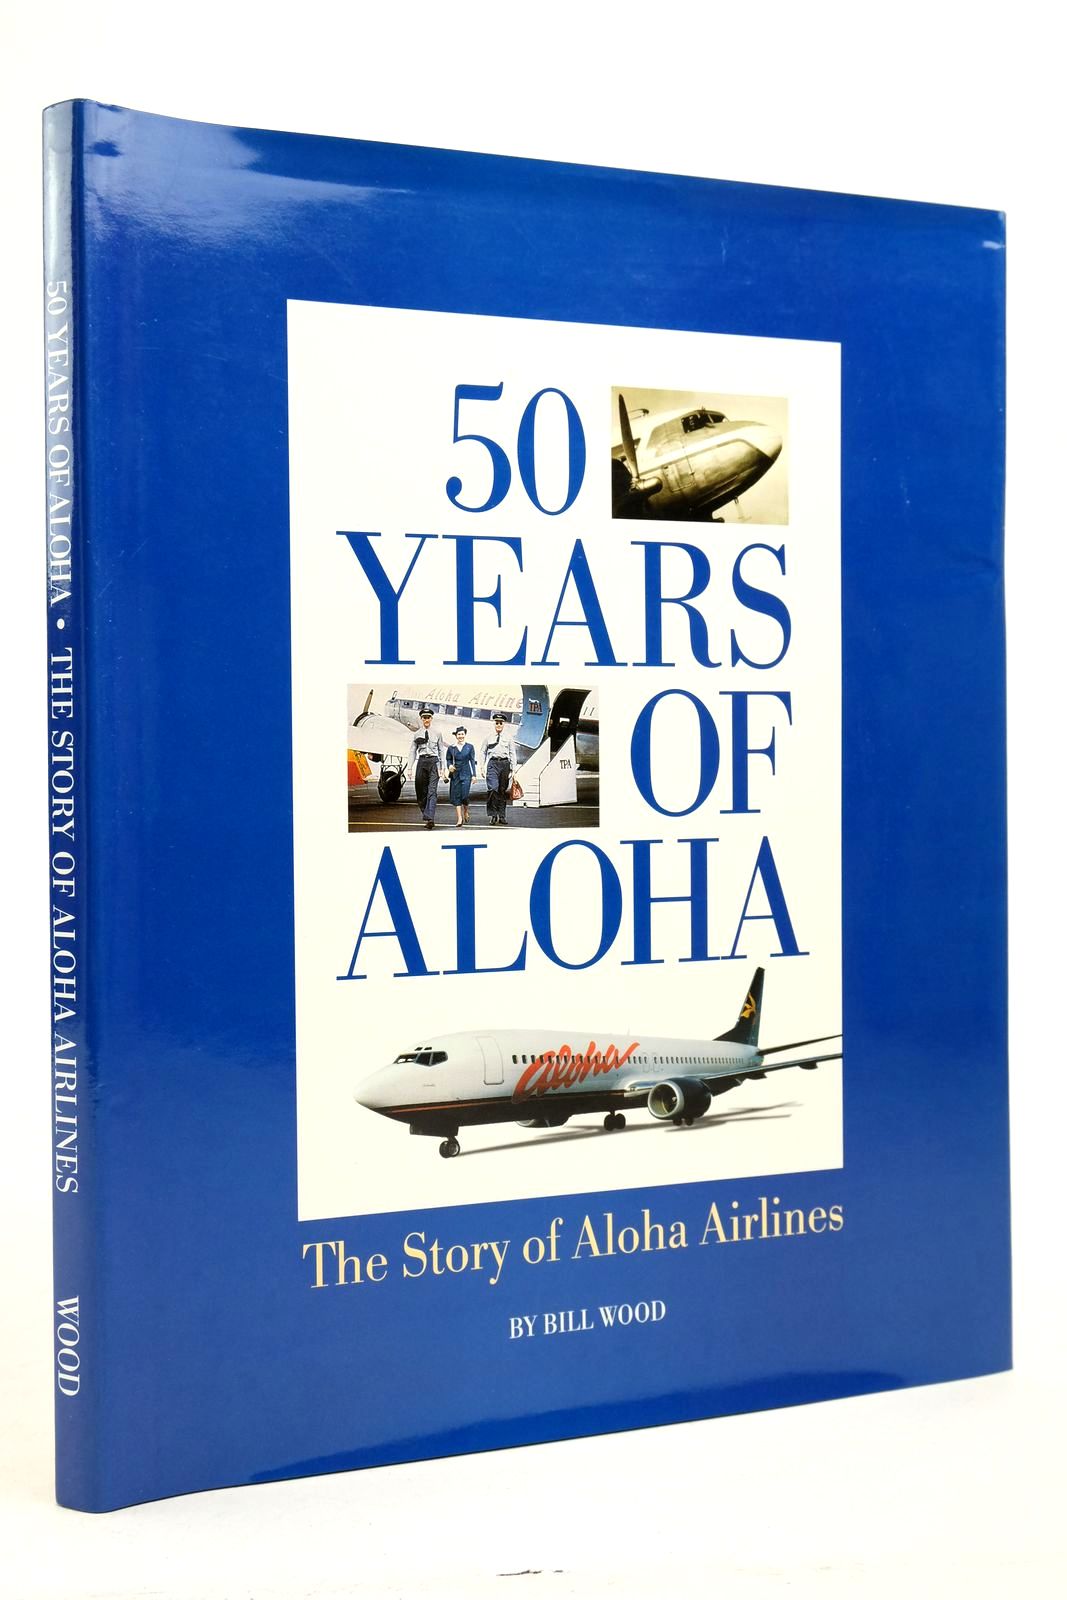 Photo of 50 YEARS OF ALOHA: THE STORY OF ALOHA AIRLINES- Stock Number: 2139703